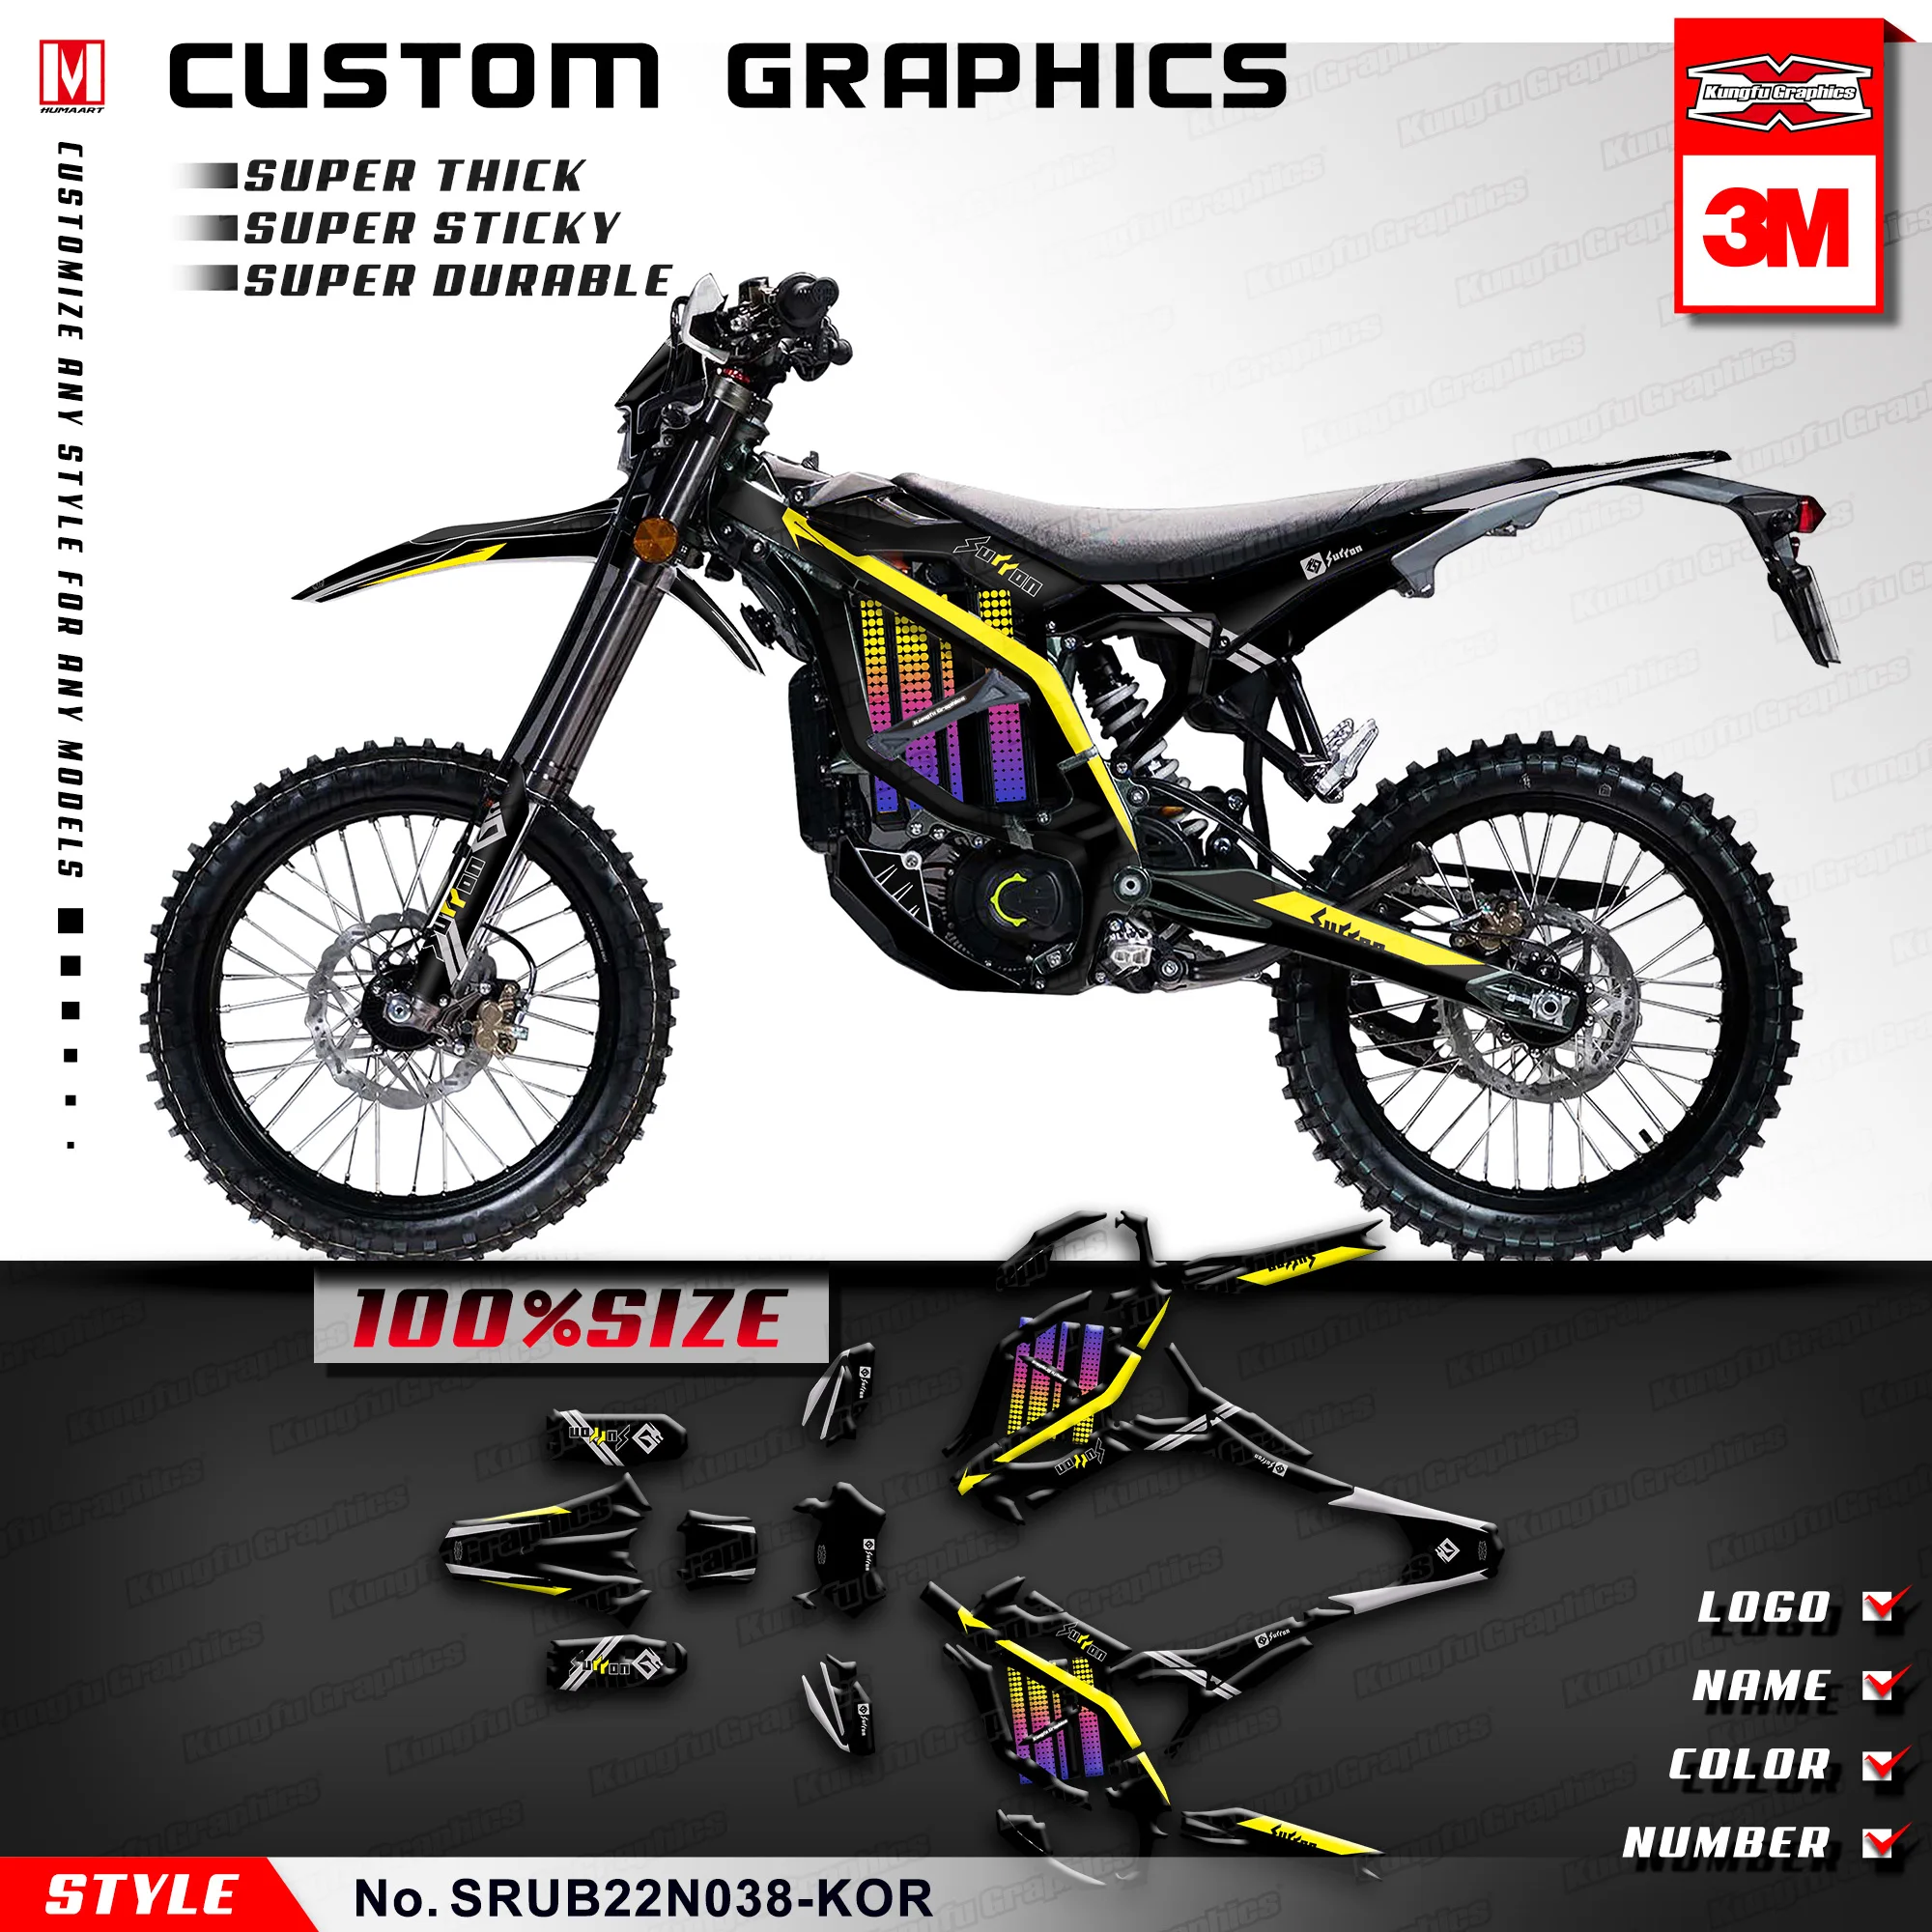 KUNGFU GRAPHICS Adhesives Stickers Custom Decal Kit Full Wrap for Sur-Ron Ultra Bee Dirt eBike SURRON, SRUB22N038-KOR high quality custom very low latency 4k ultra hd video conference camera